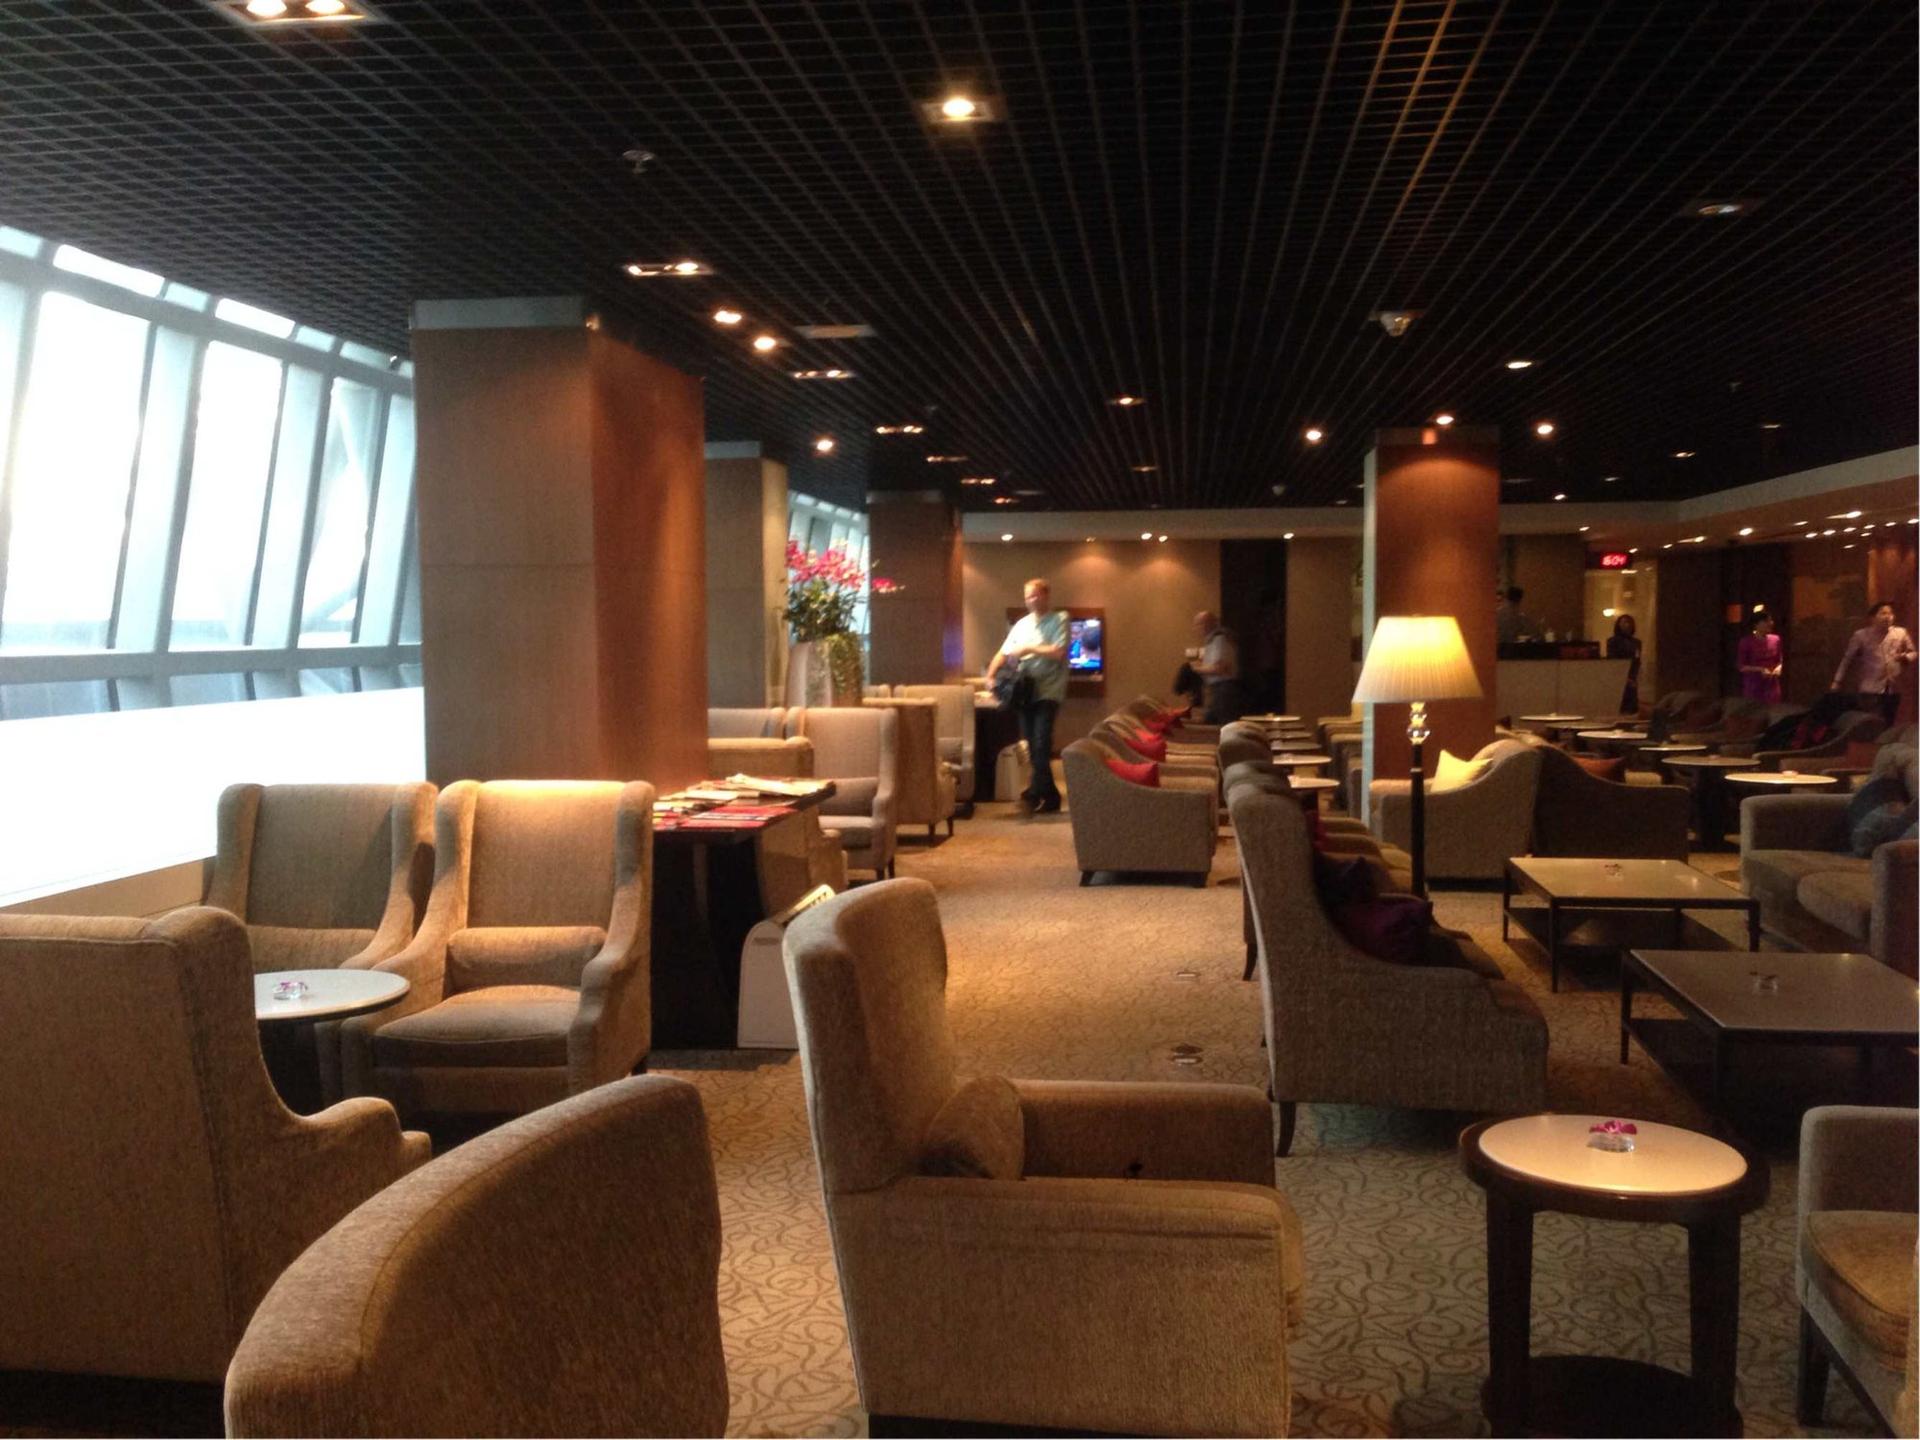 Thai Airways Royal First Class Lounge image 24 of 44